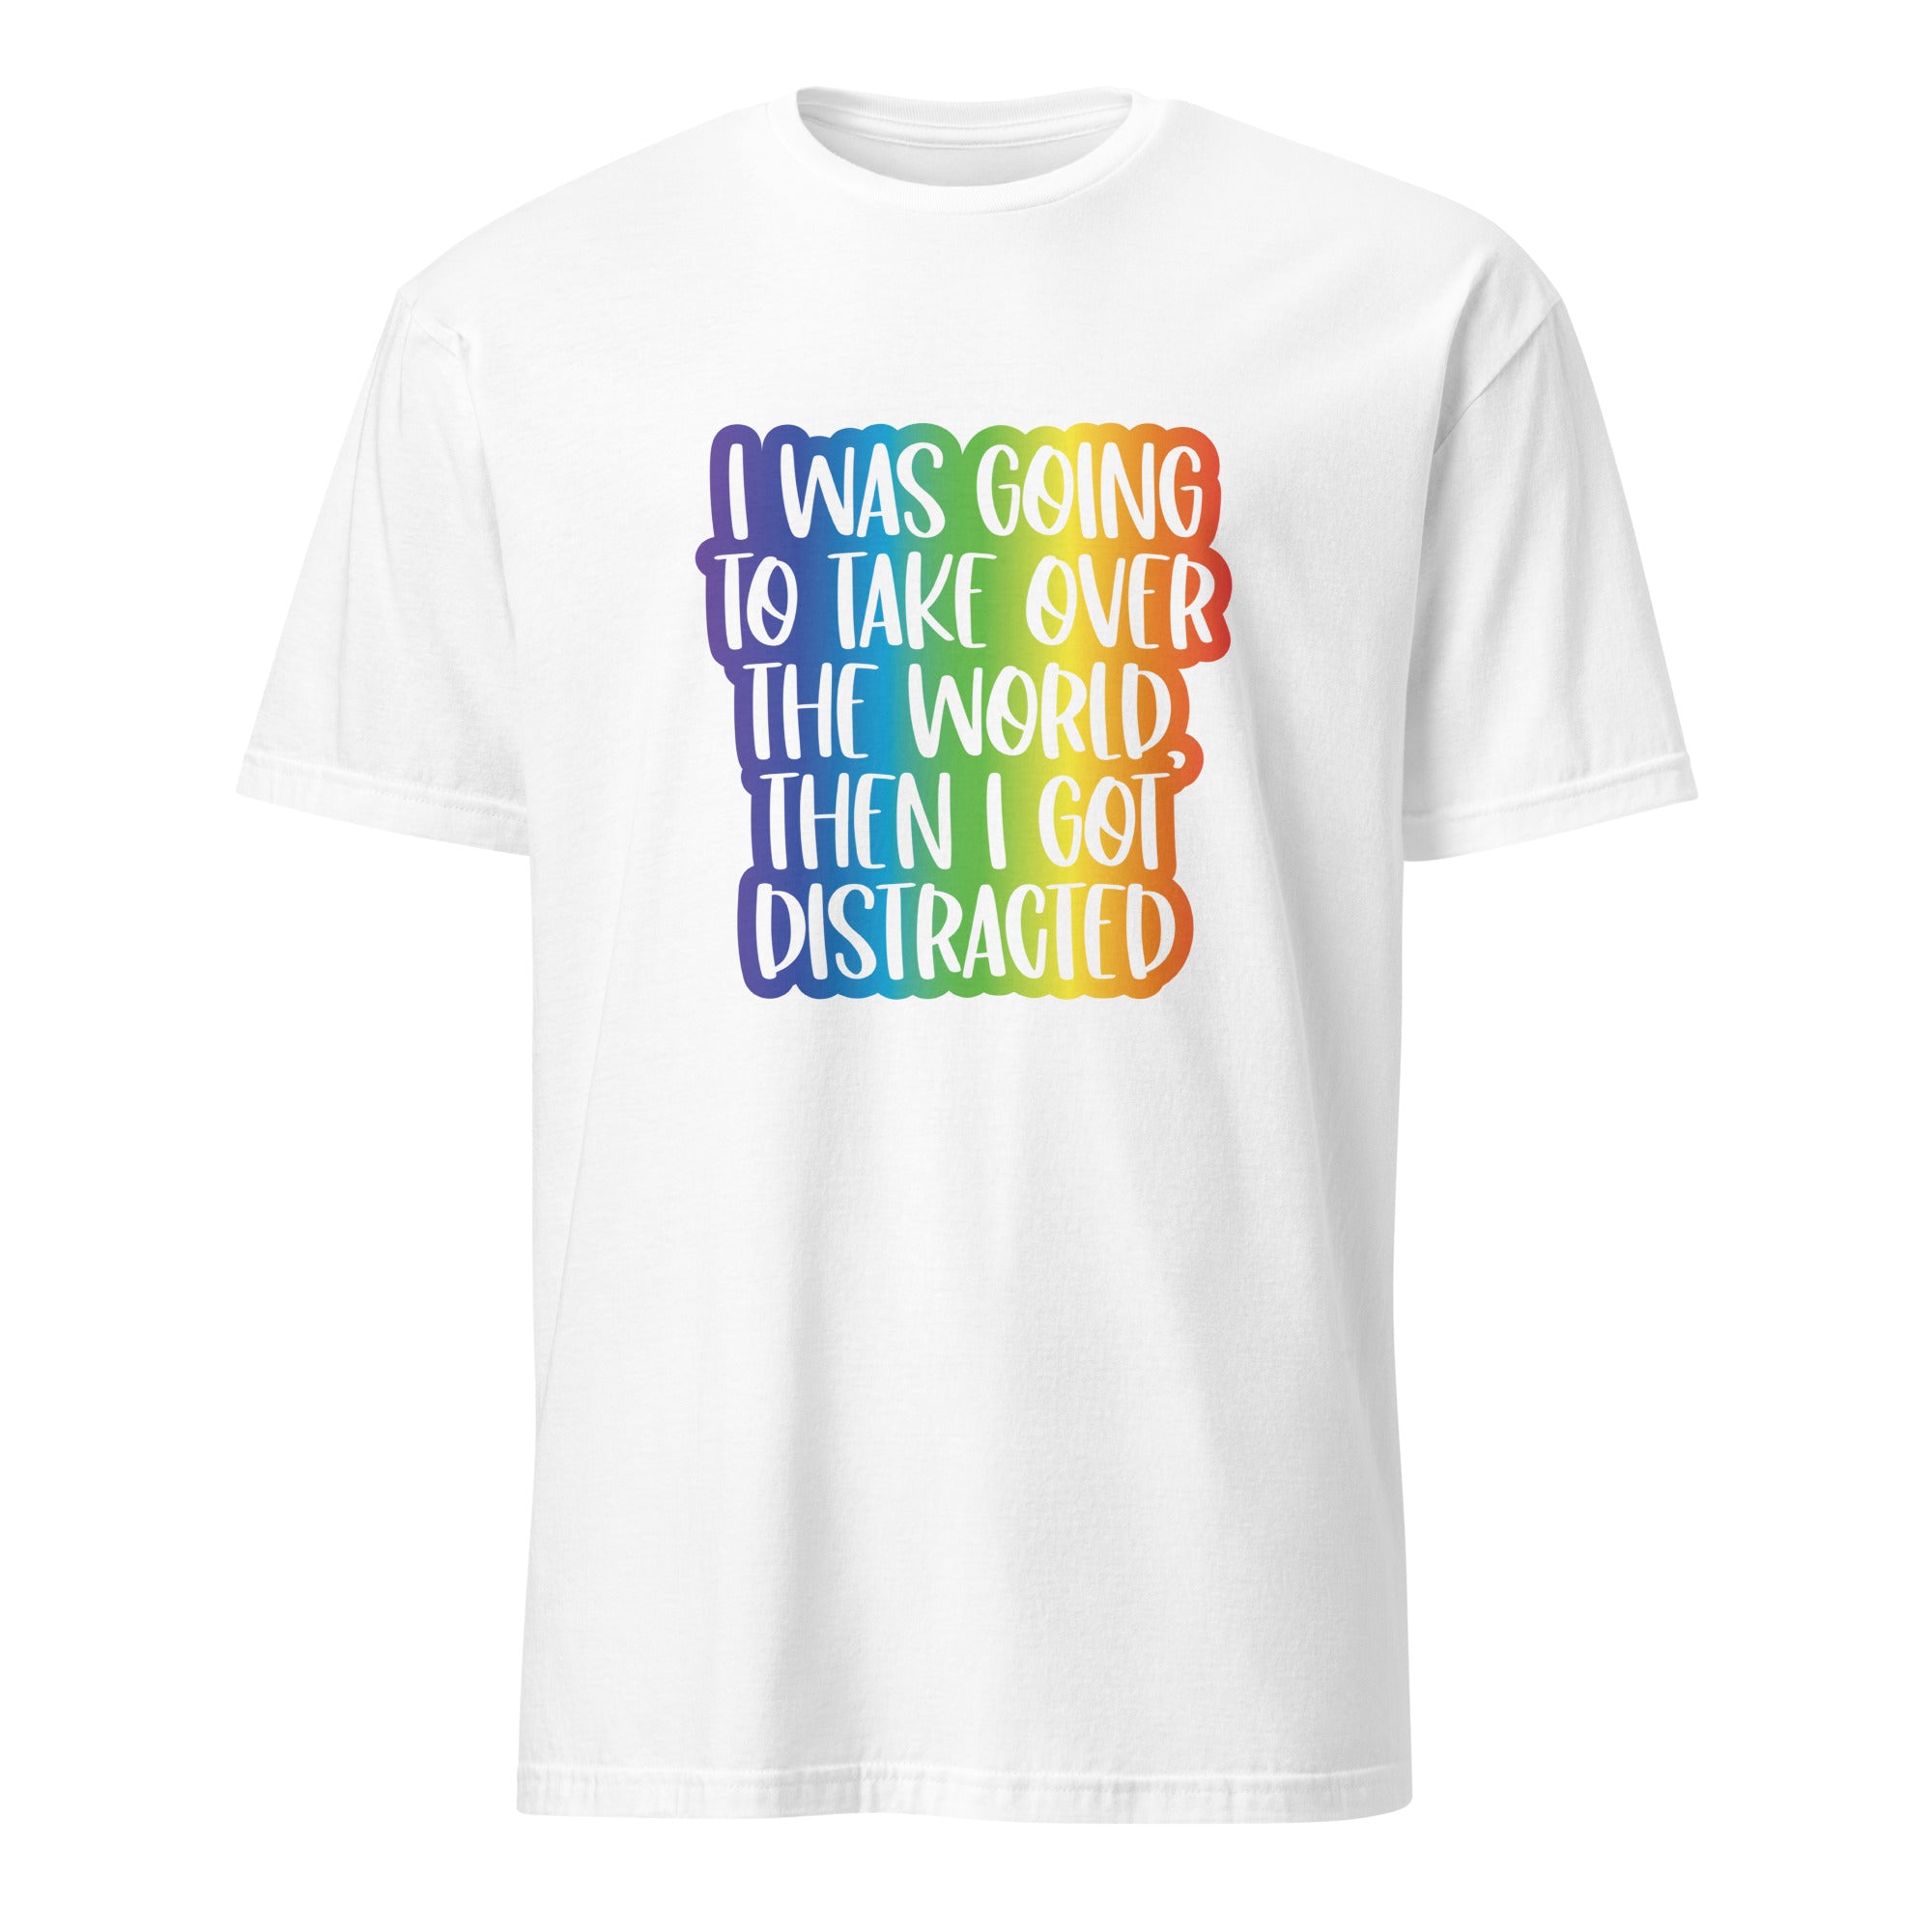 Short-Sleeve Unisex T-Shirt- ADHD- Take Over The World